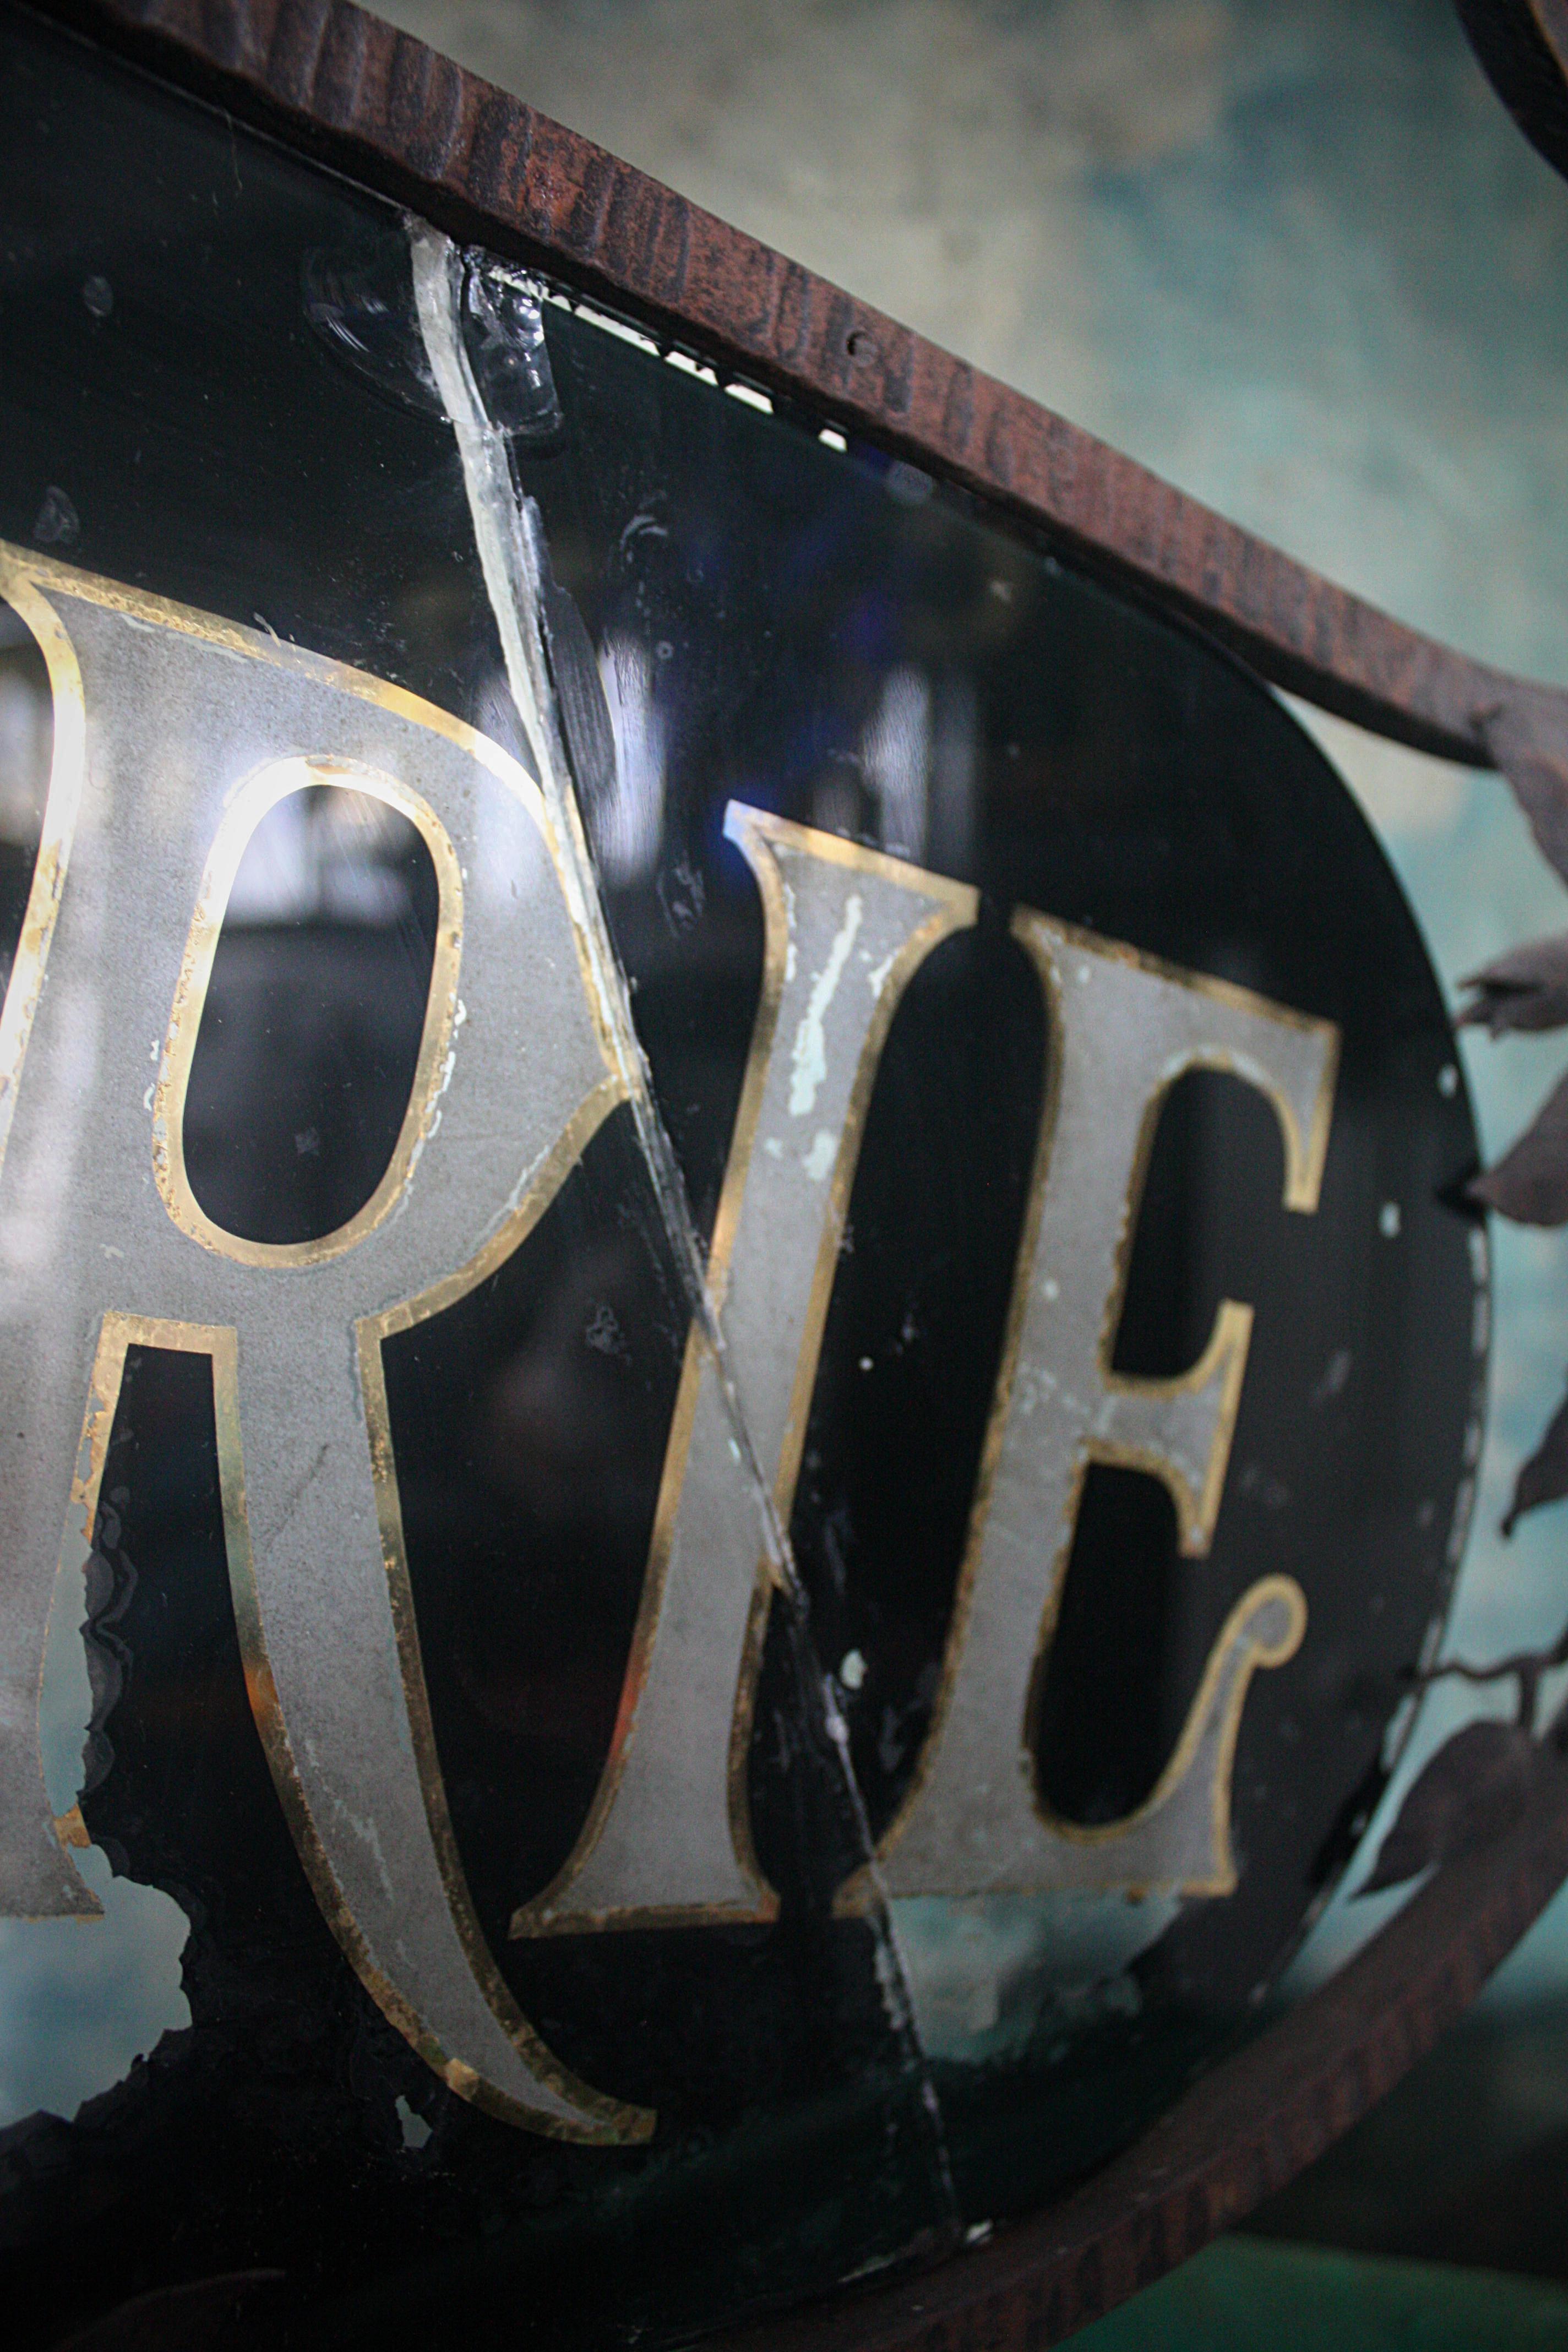 Late 19th Century 19th Century French Jeweler's Trade Sign Verre Eglomise Blacksmith Art Nouveau